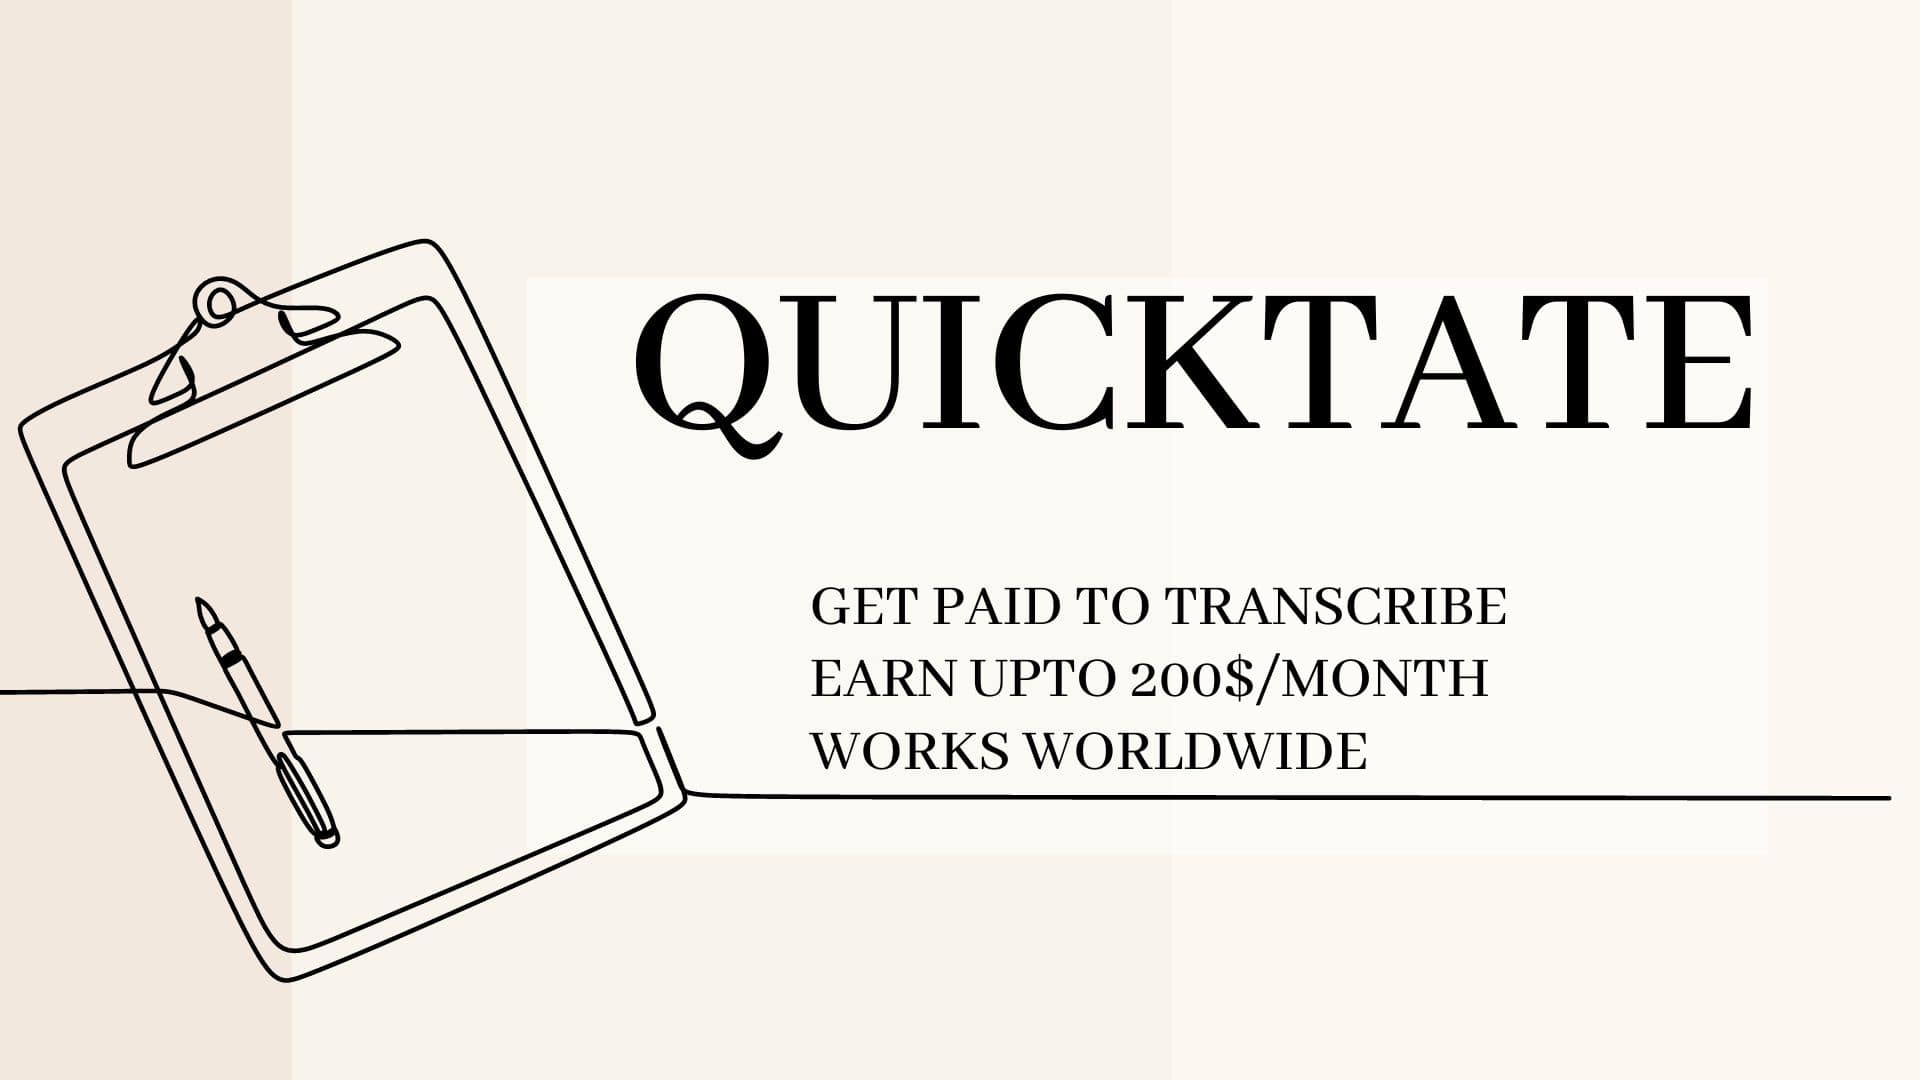 Quicktate: This platform pays for converting audio files into text (Transcription Work)￼